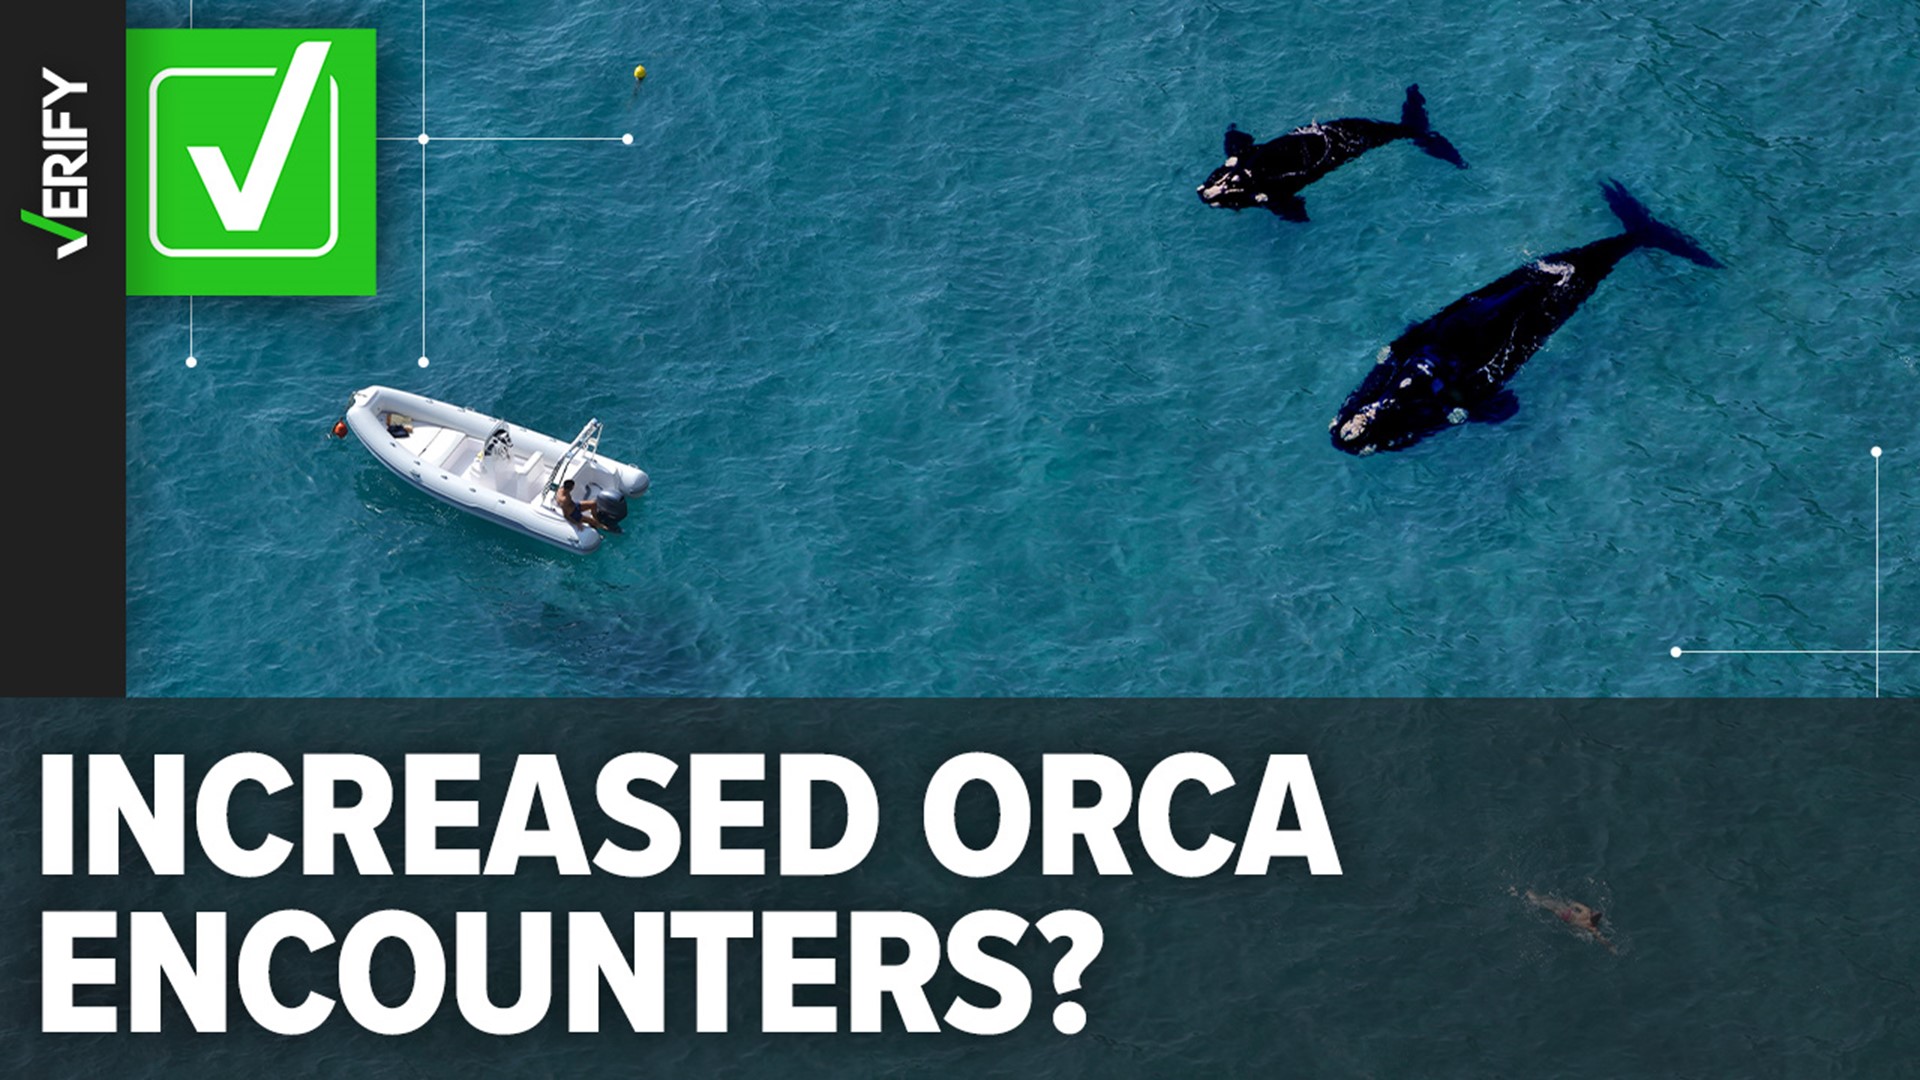 More than 500 encounters between orcas and boats have been reported since 2020 around Europe's Iberian Peninsula.